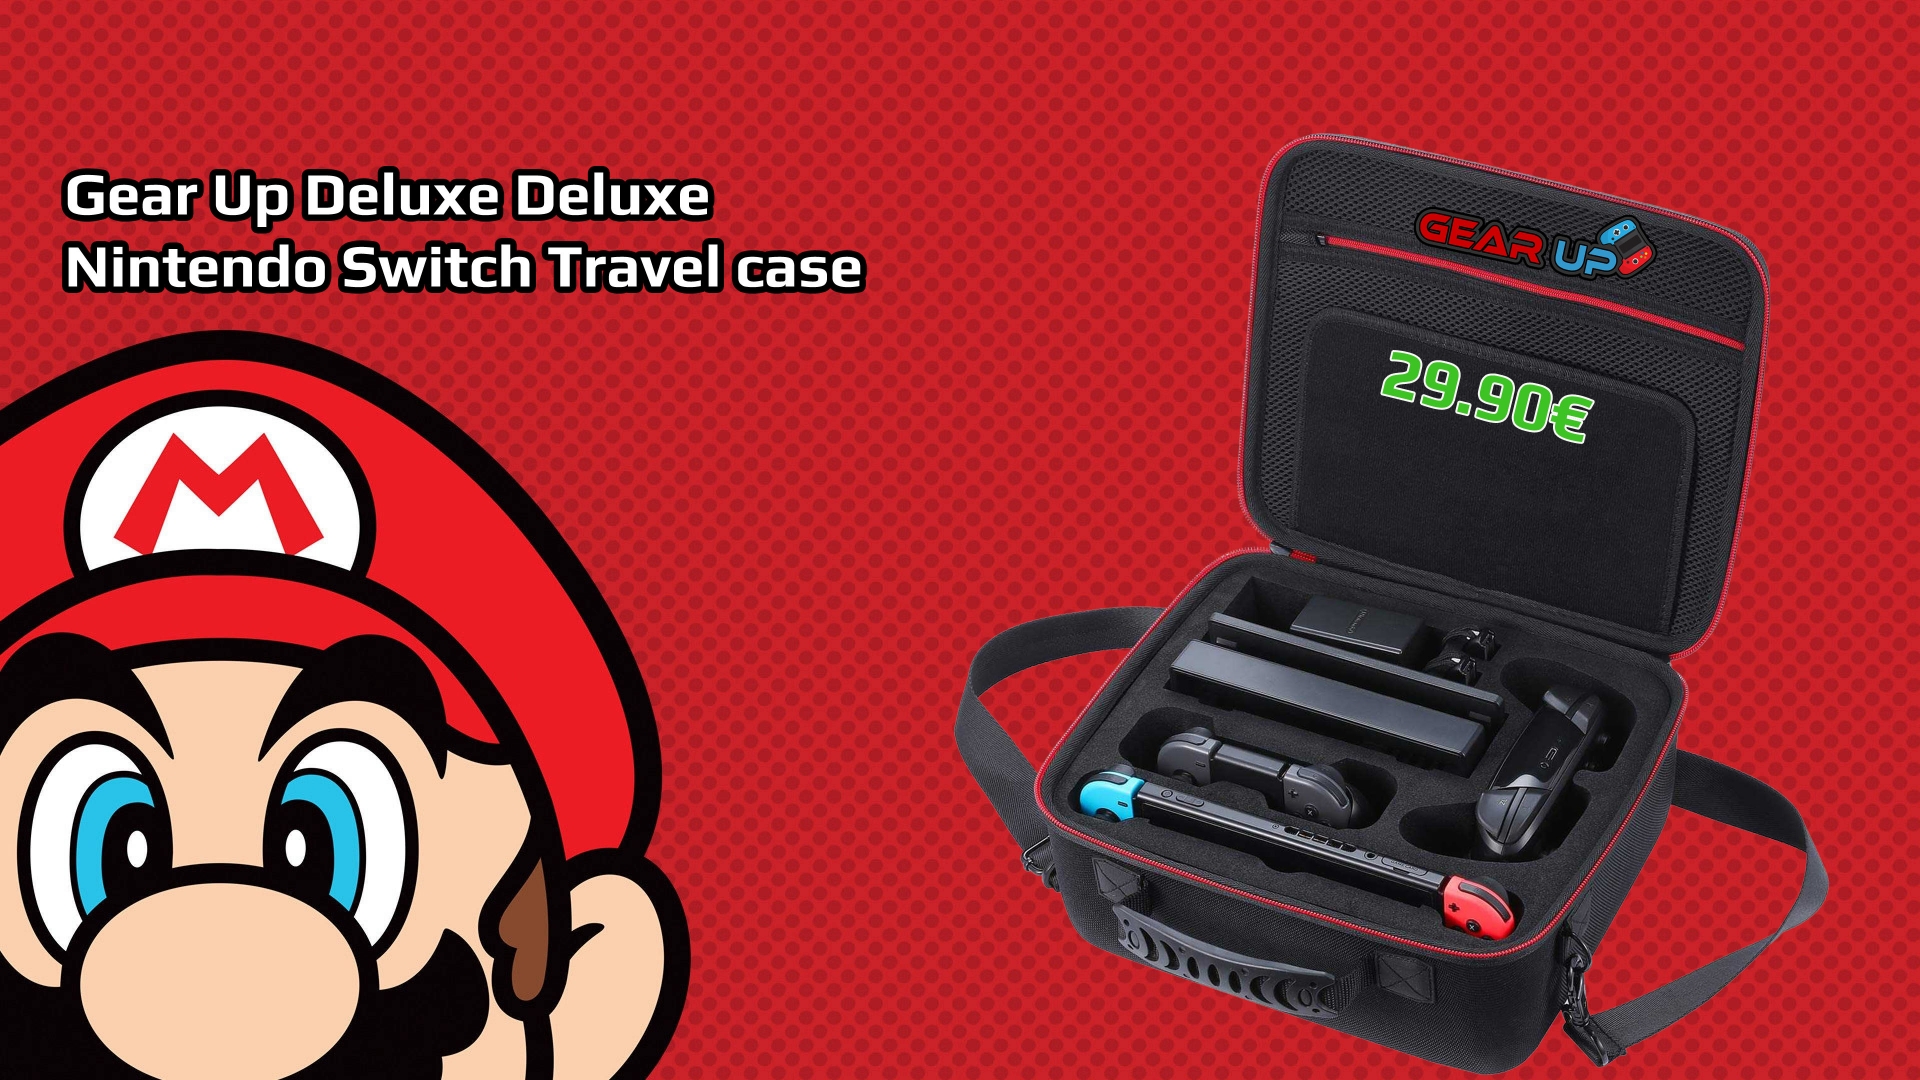 Gear up Deluxe Nintendo Switch Travel case